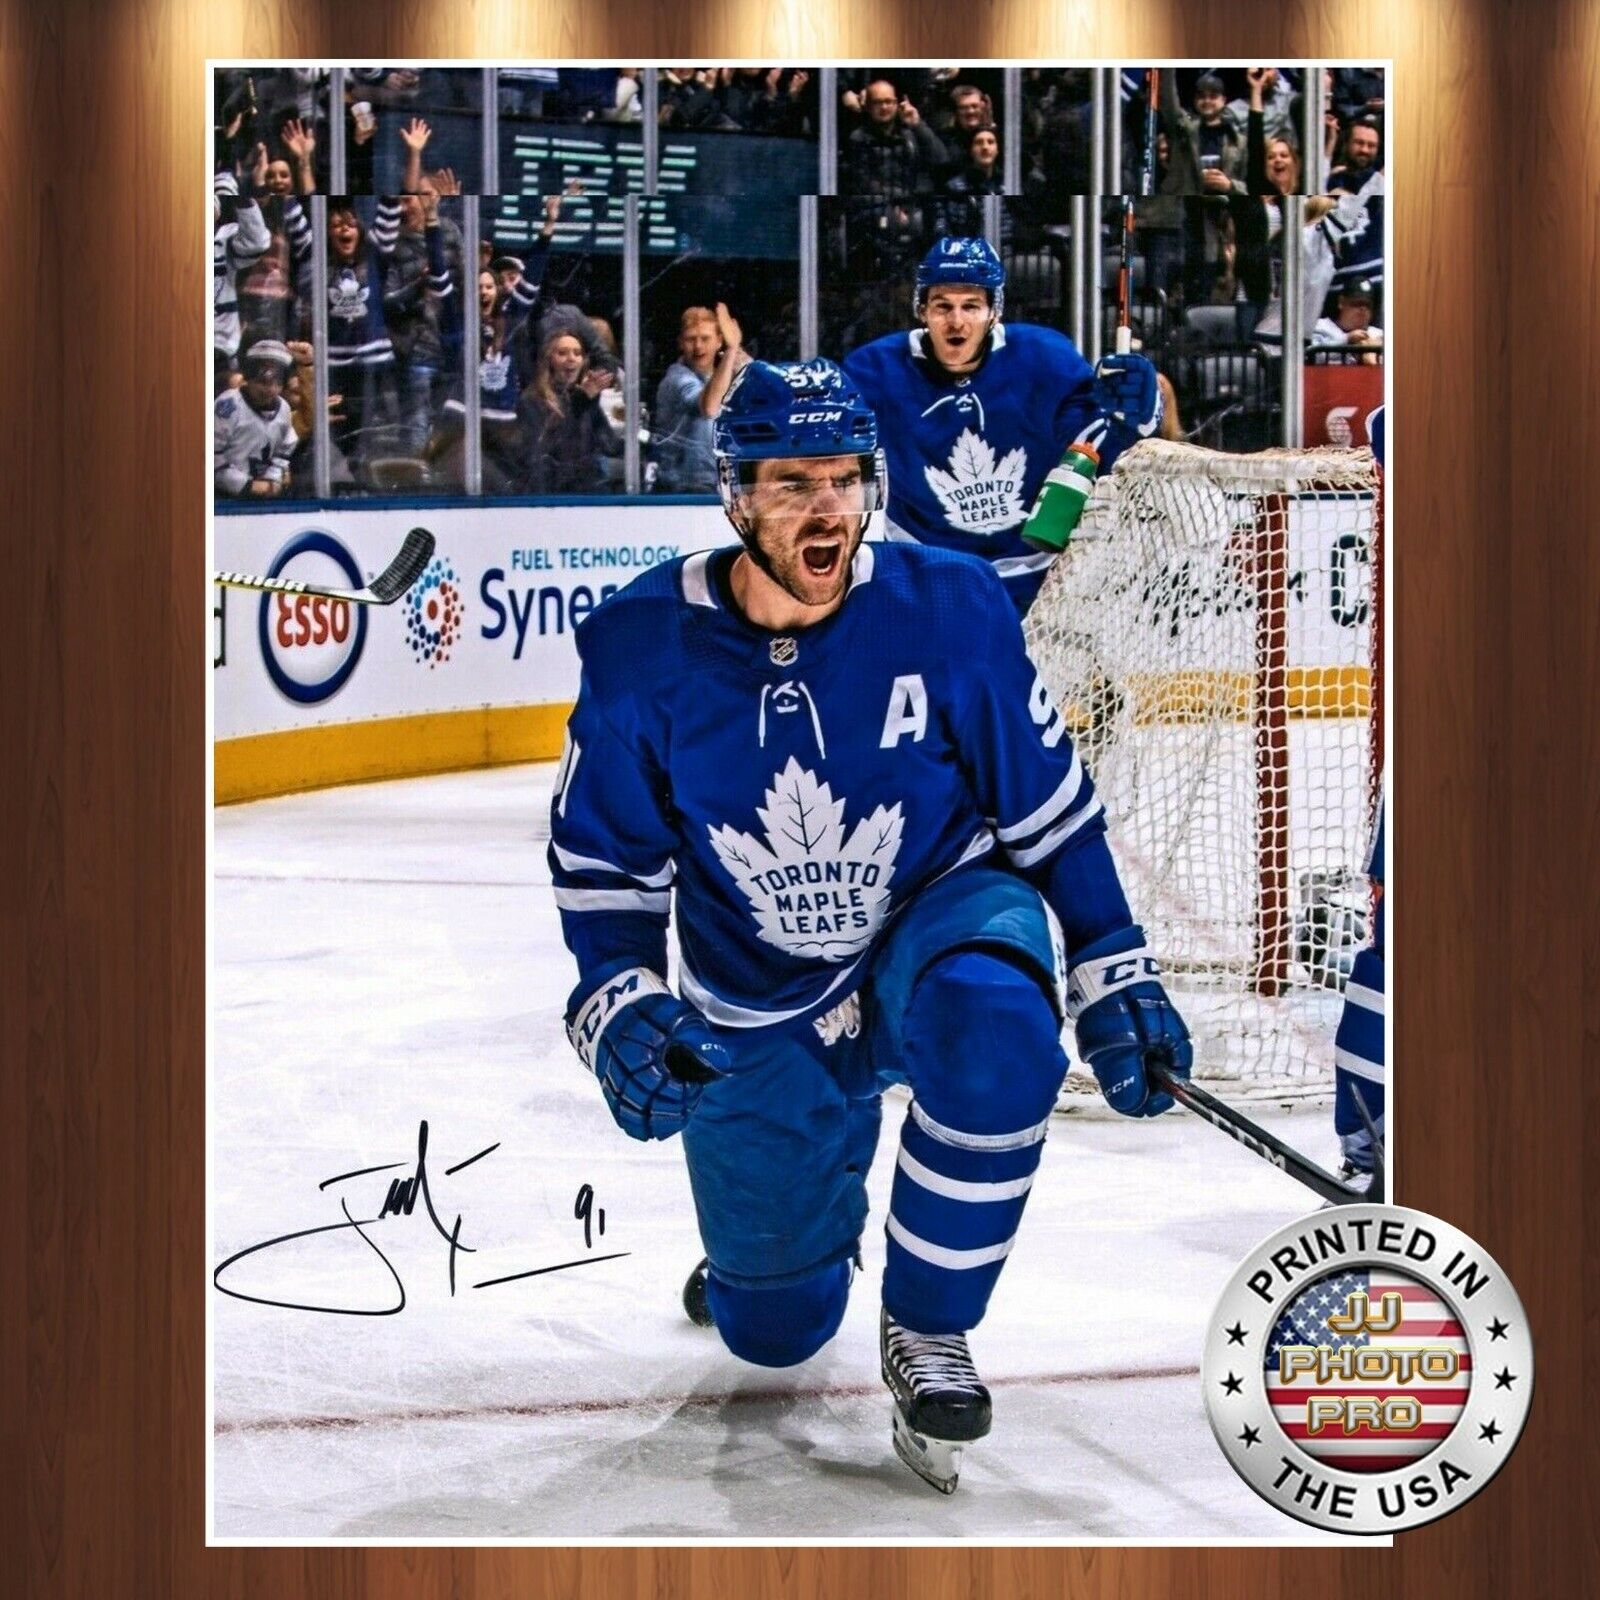 John Tavares Autographed Signed 8x10 Photo Poster painting (Maple Leafs) REPRINT